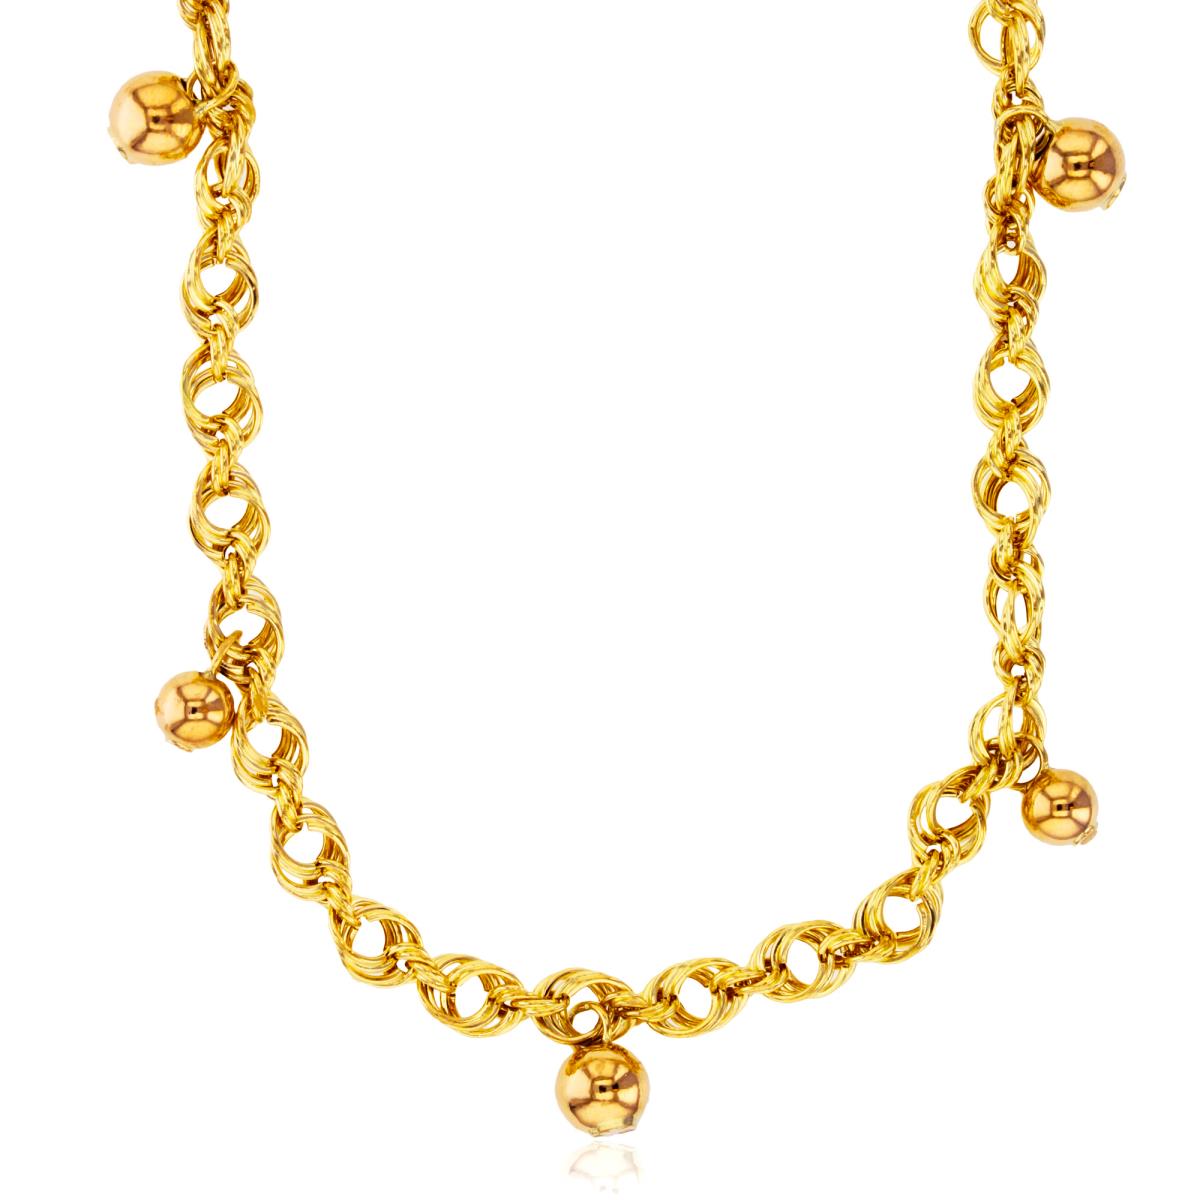 14K Yellow Gold Fancy Rope with 6mm Dangling Beads 18" Chain